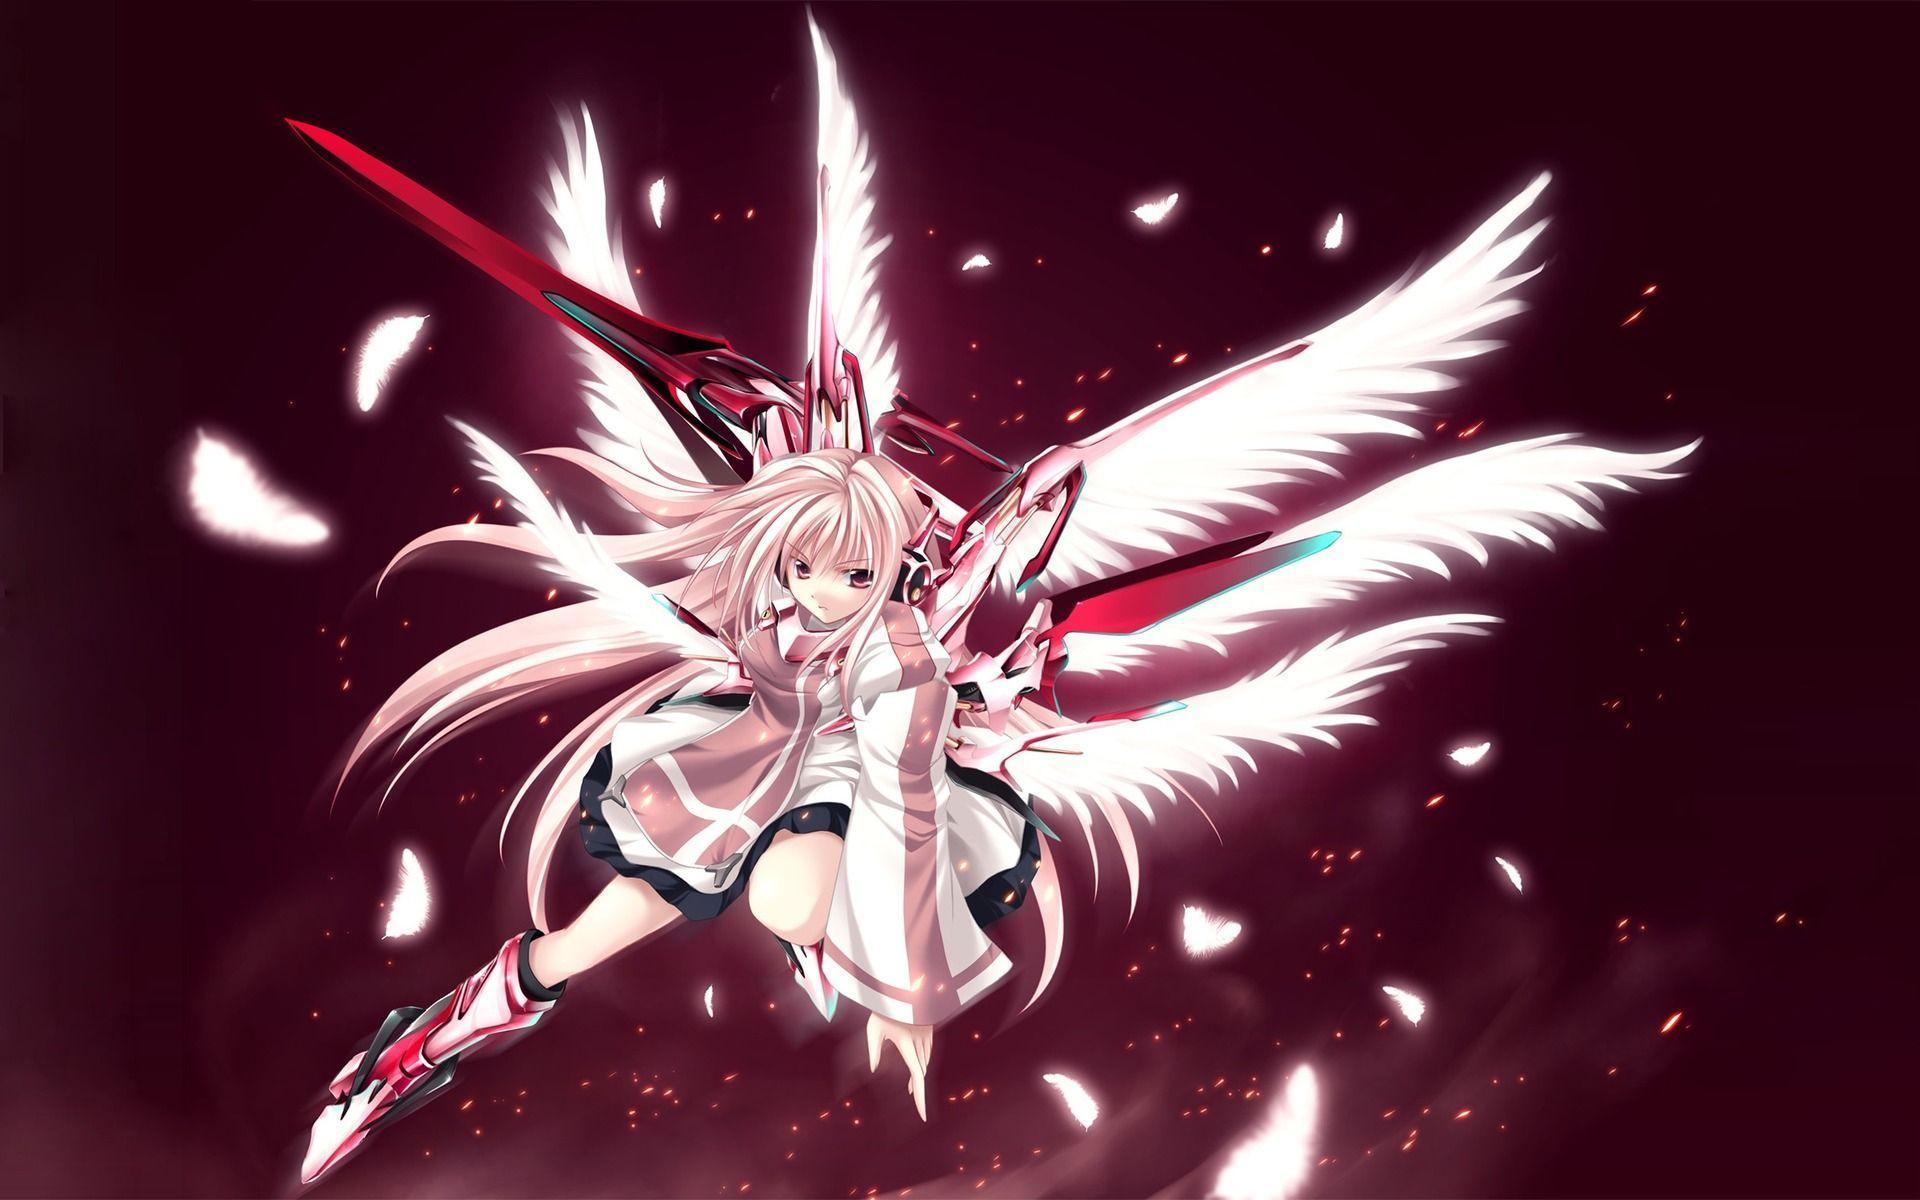 Free Download anime angel hd Wallpapers in 1920x1200 resolutions